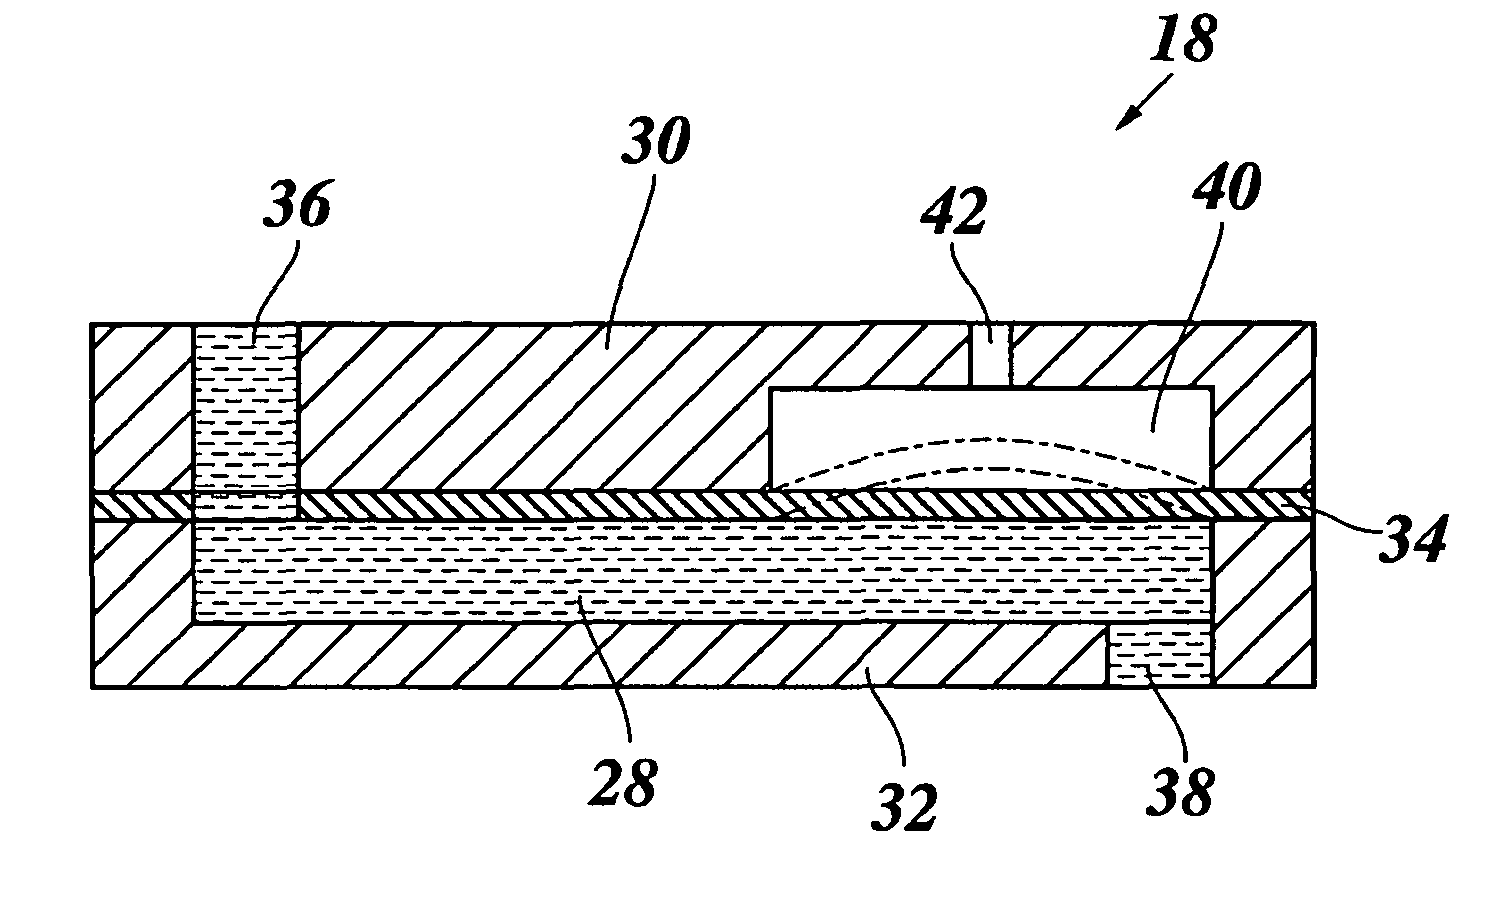 Ink supply assembly for an ink jet printing device